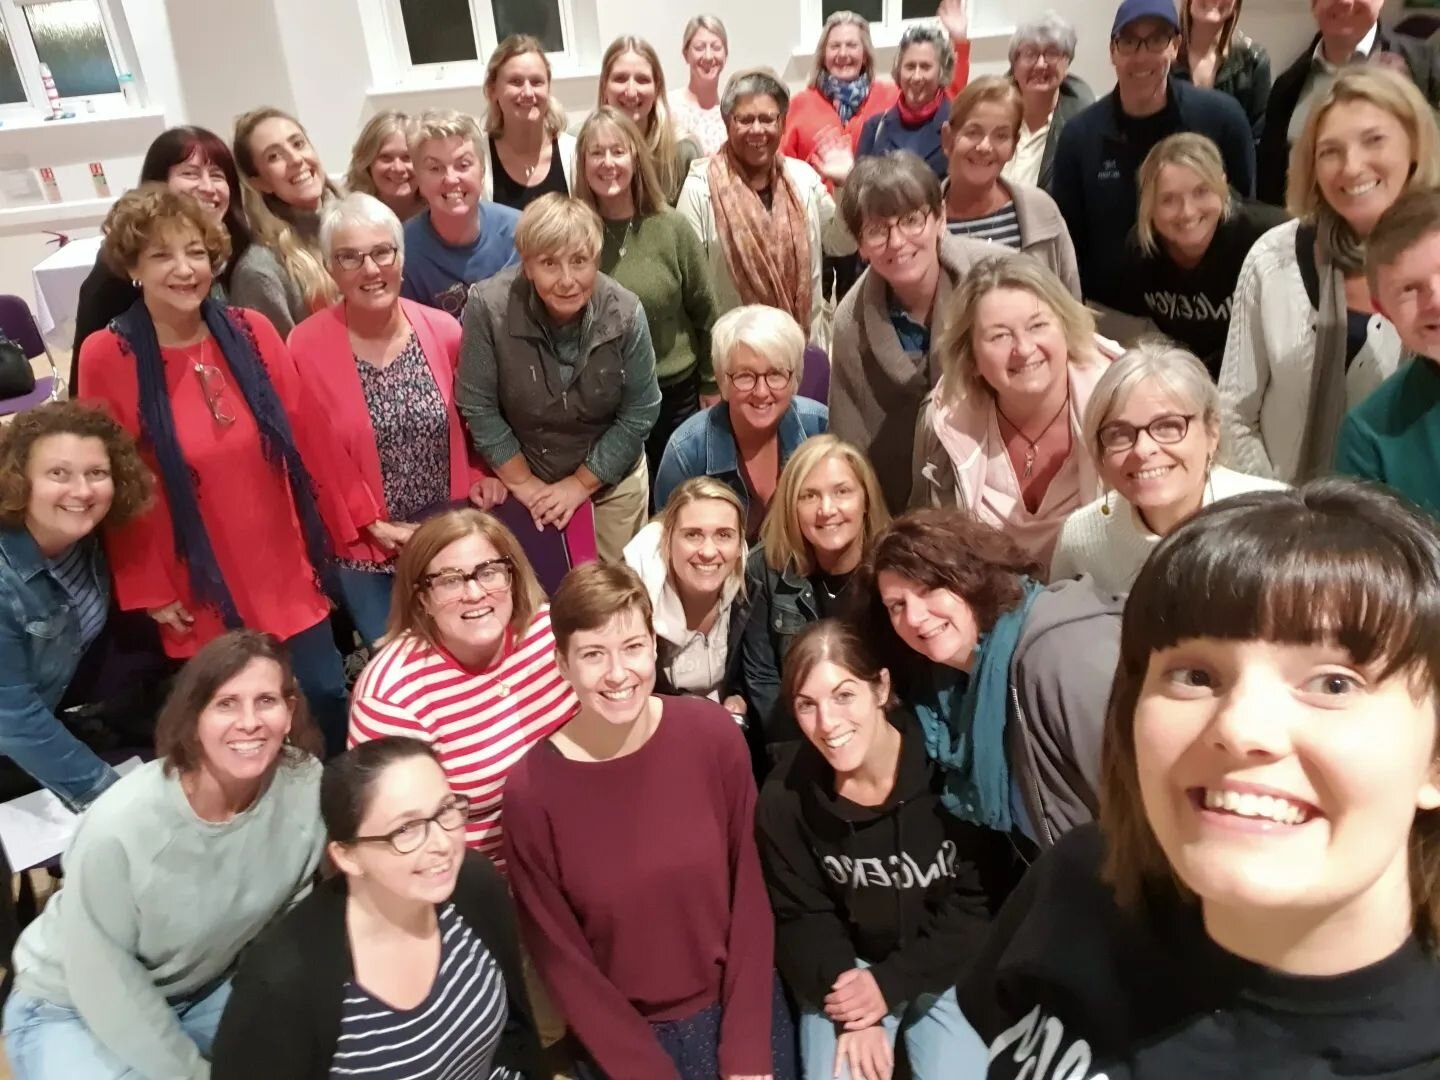 Great session with the Horsham choir last night. They managed to finish a song in one night 👊

We love our Mondays with these guys! 

Have a happy week singing and practicing 🎶🎤🎧